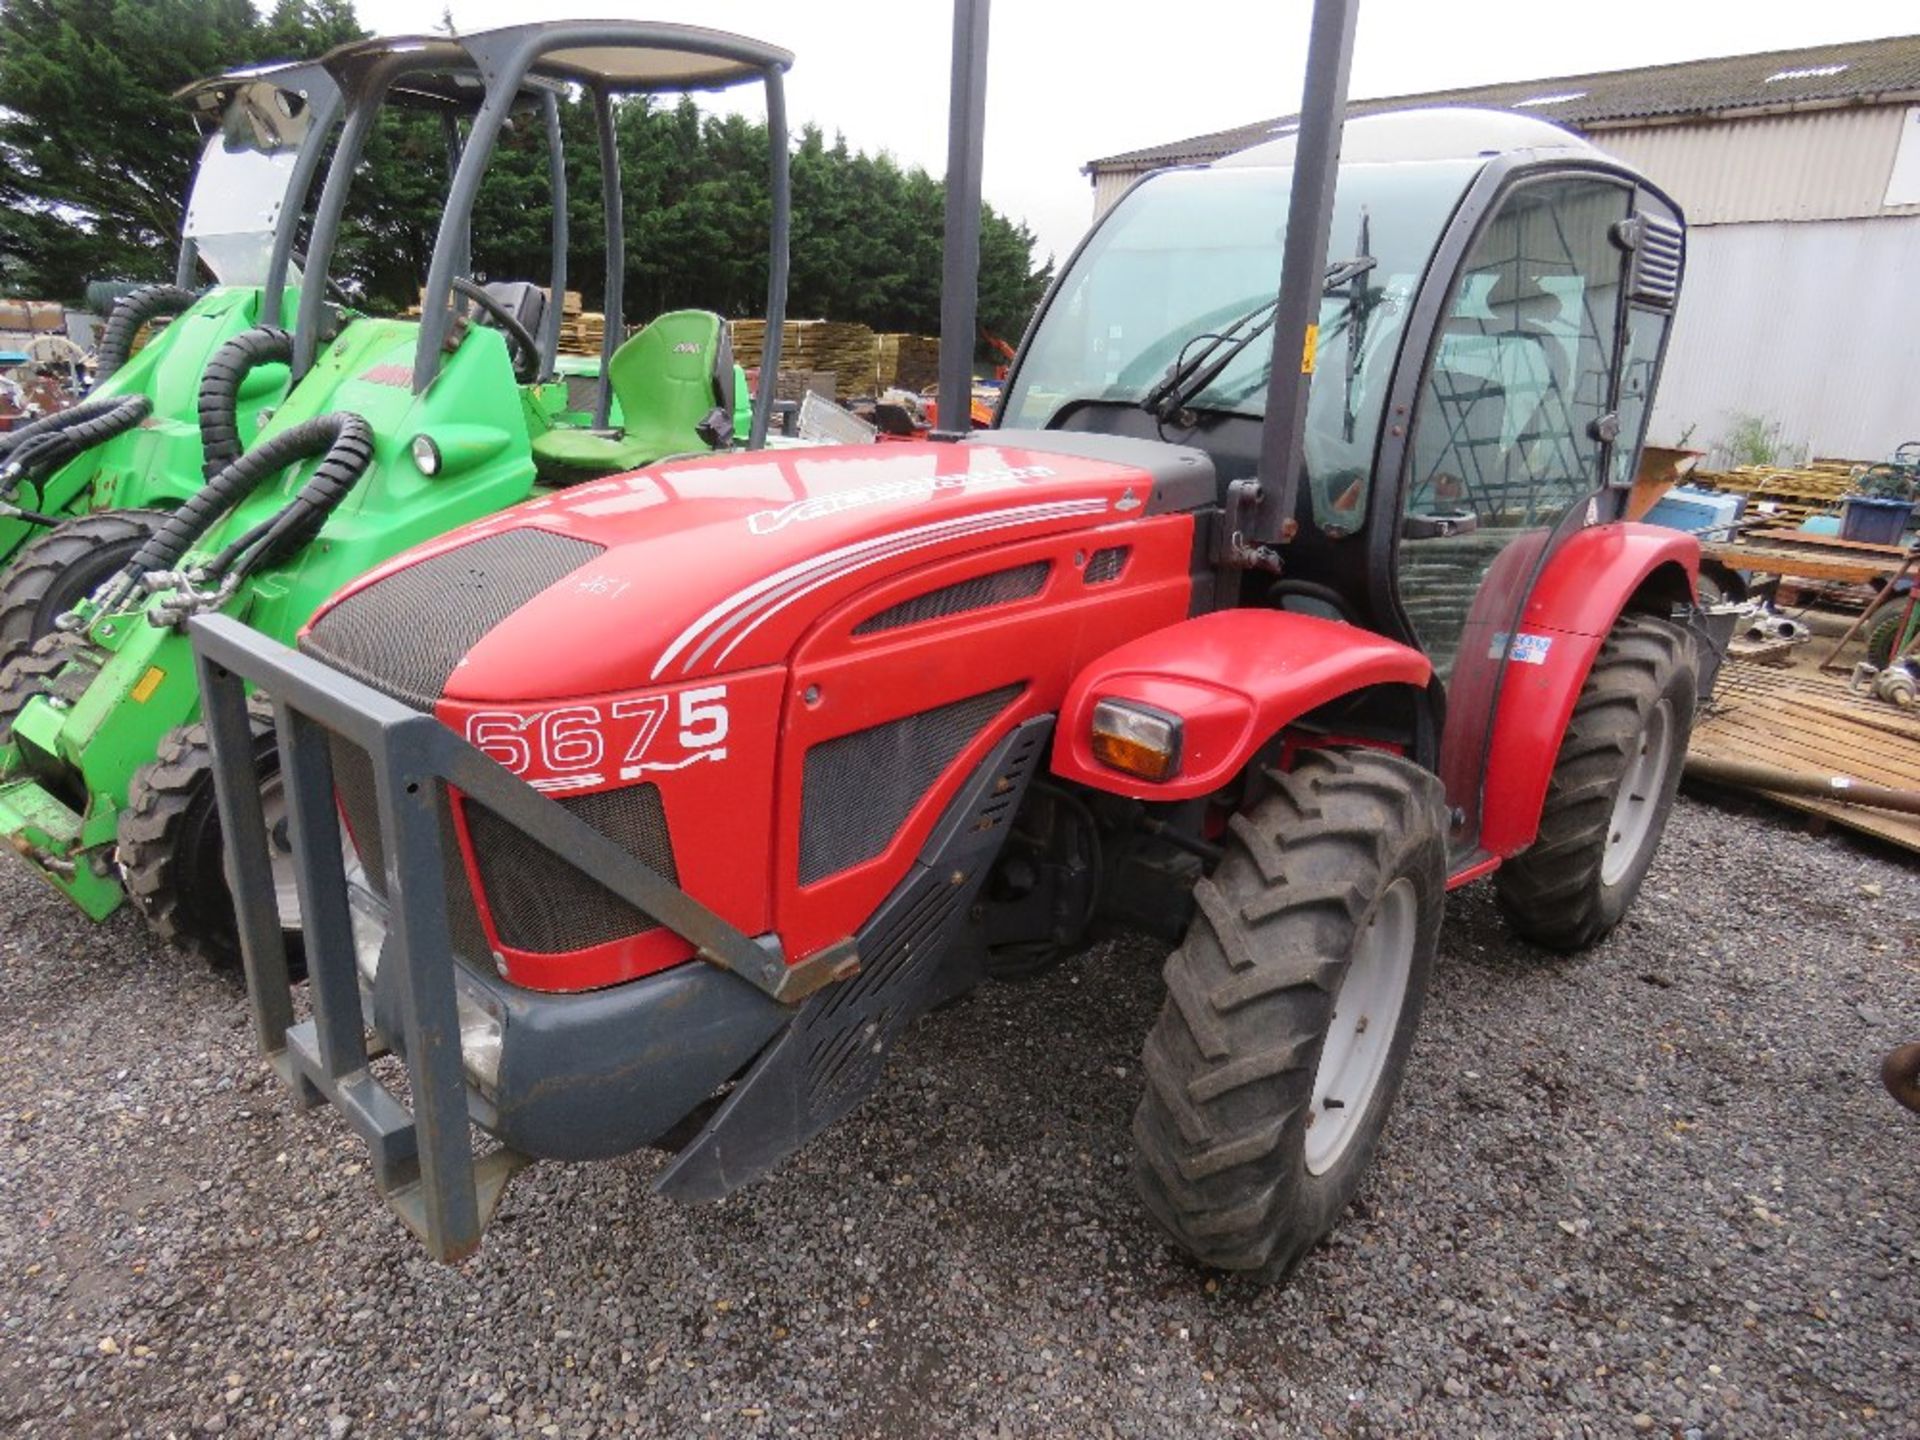 VALPADANA 6675 ARTIC STEER VINEYARD/FORESTRY AGRICULTURAL TRACTOR. 66HP, AIR CON CAB, 560 REC HOURS.